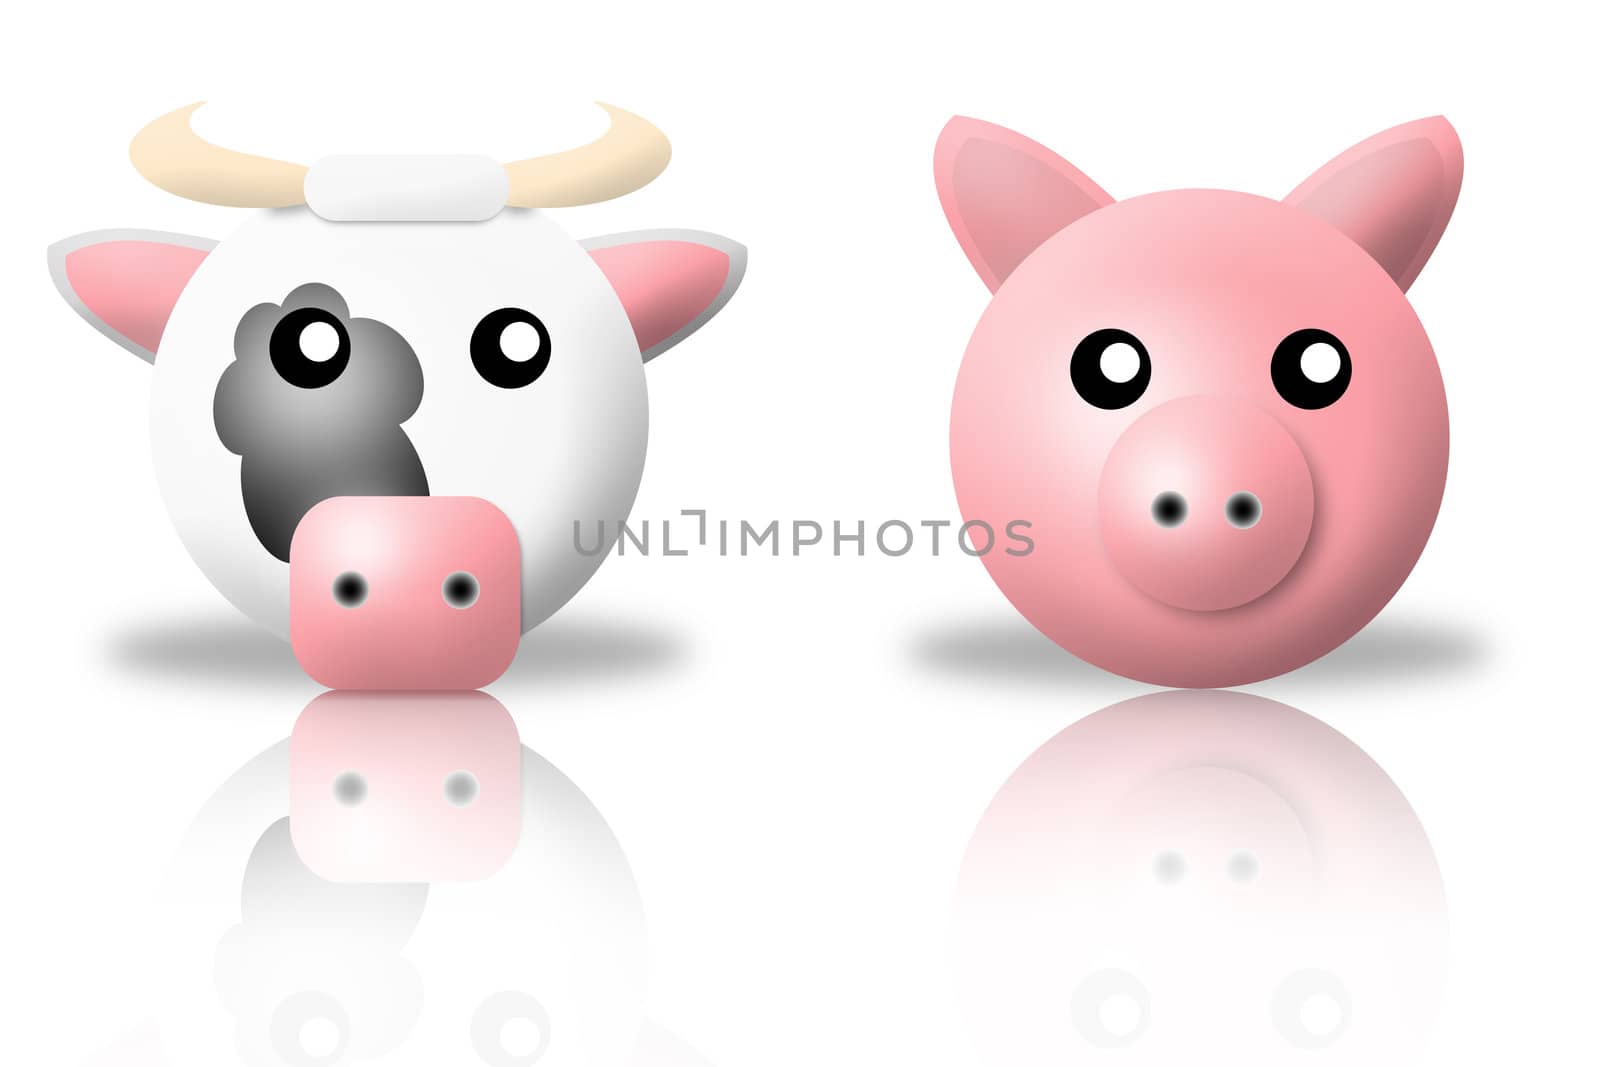 animals icons - cow and pig. white background and reflection
